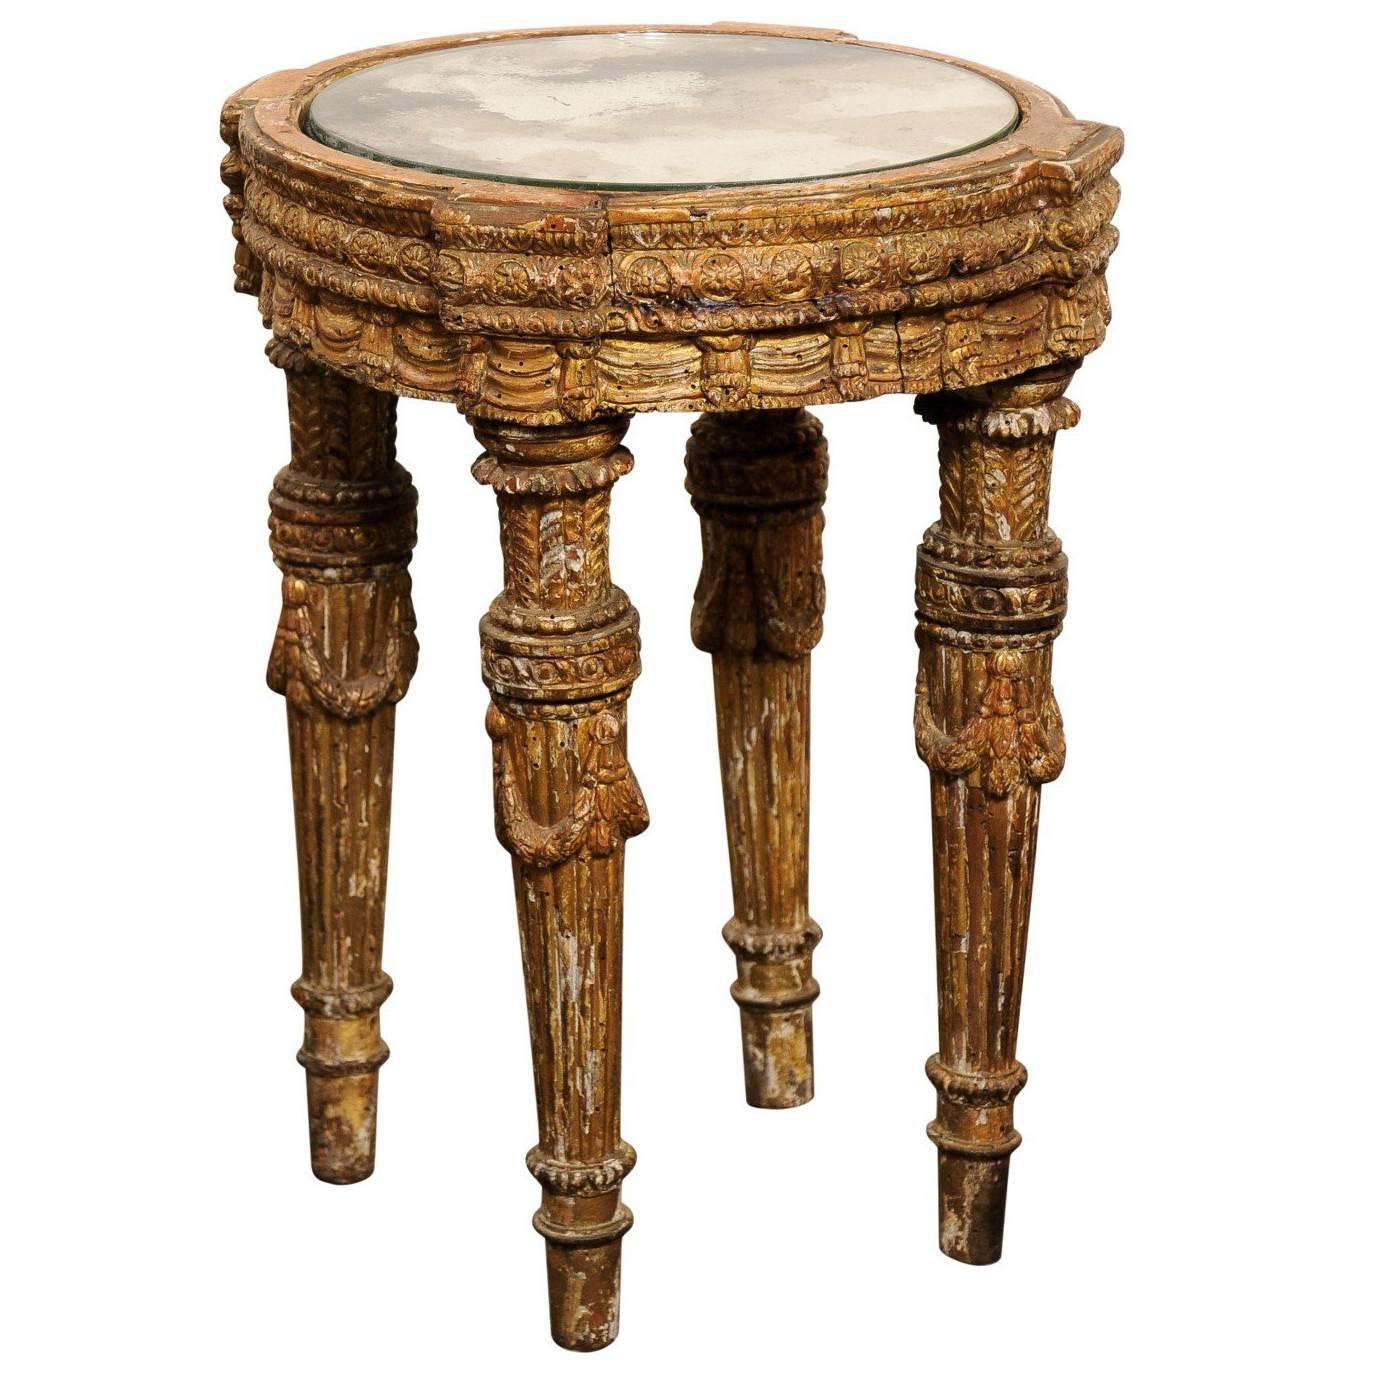 Italian Mid-18th Century Giltwood Table with Mirrored Top over Four Carved Legs